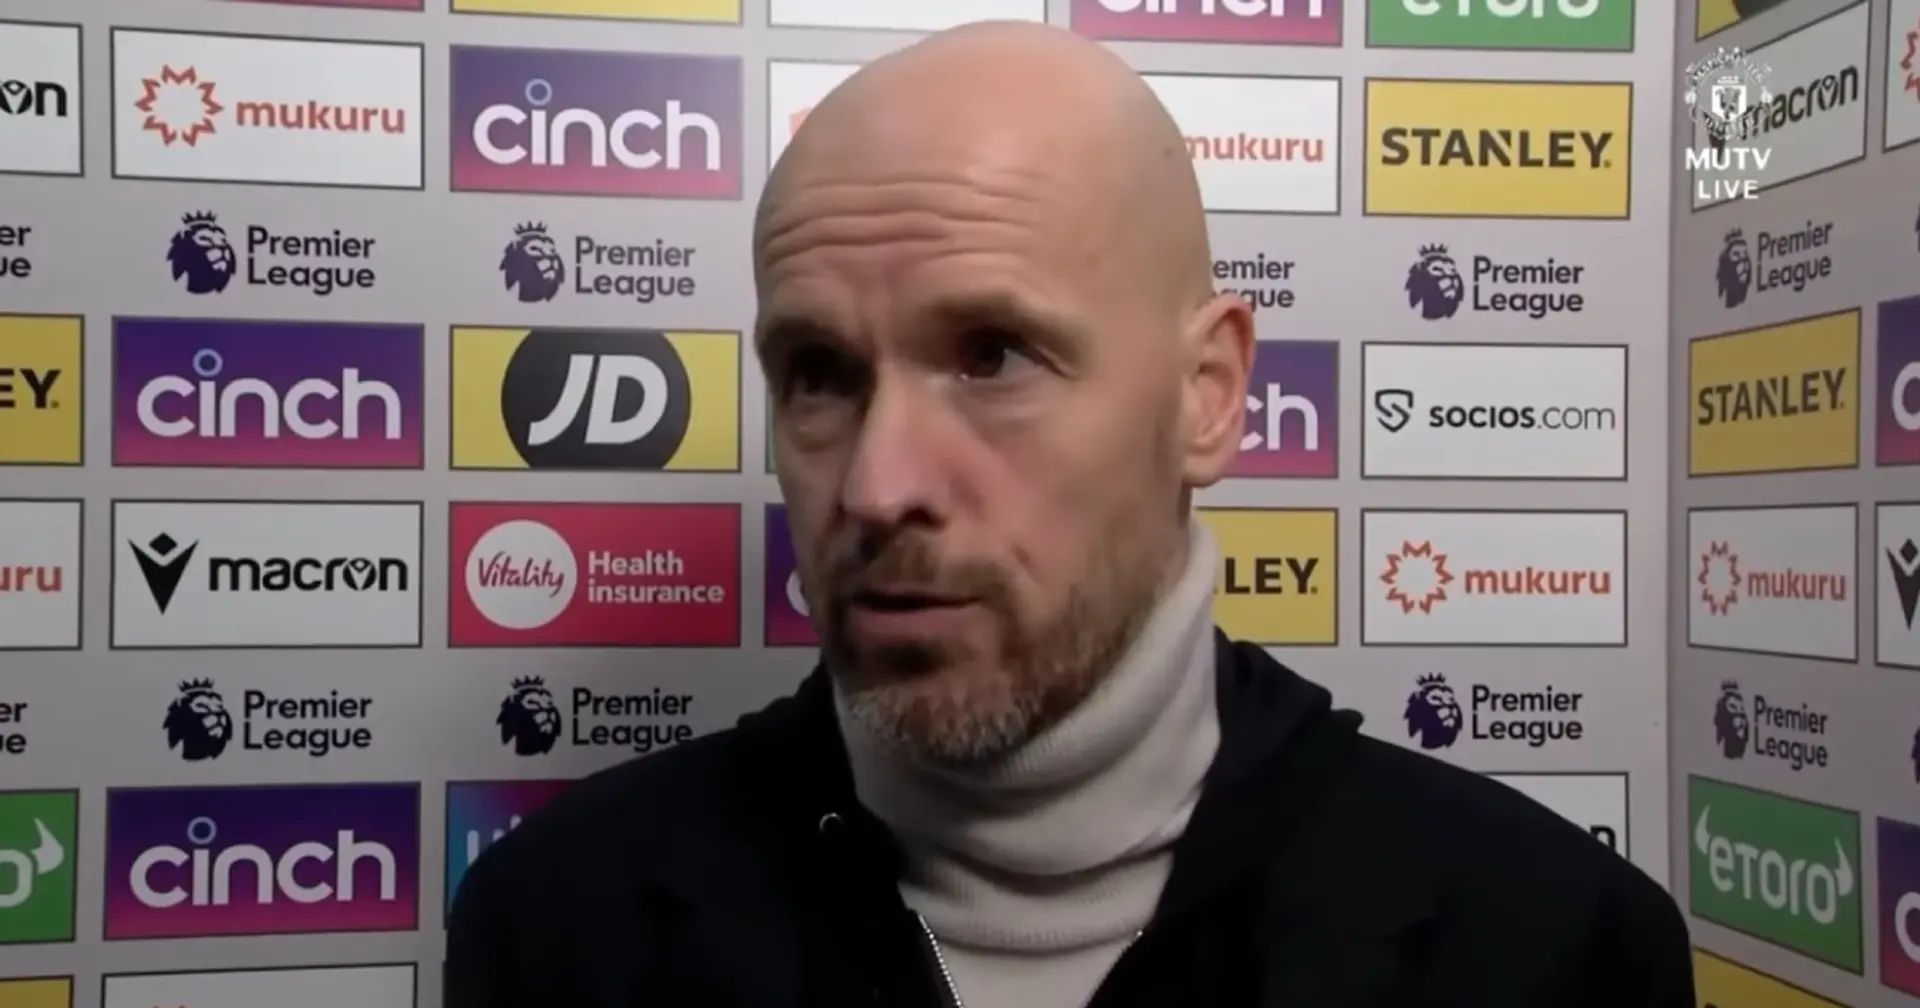 Erik ten Hag: 'We dropped 2 points. I have to criticise my team'